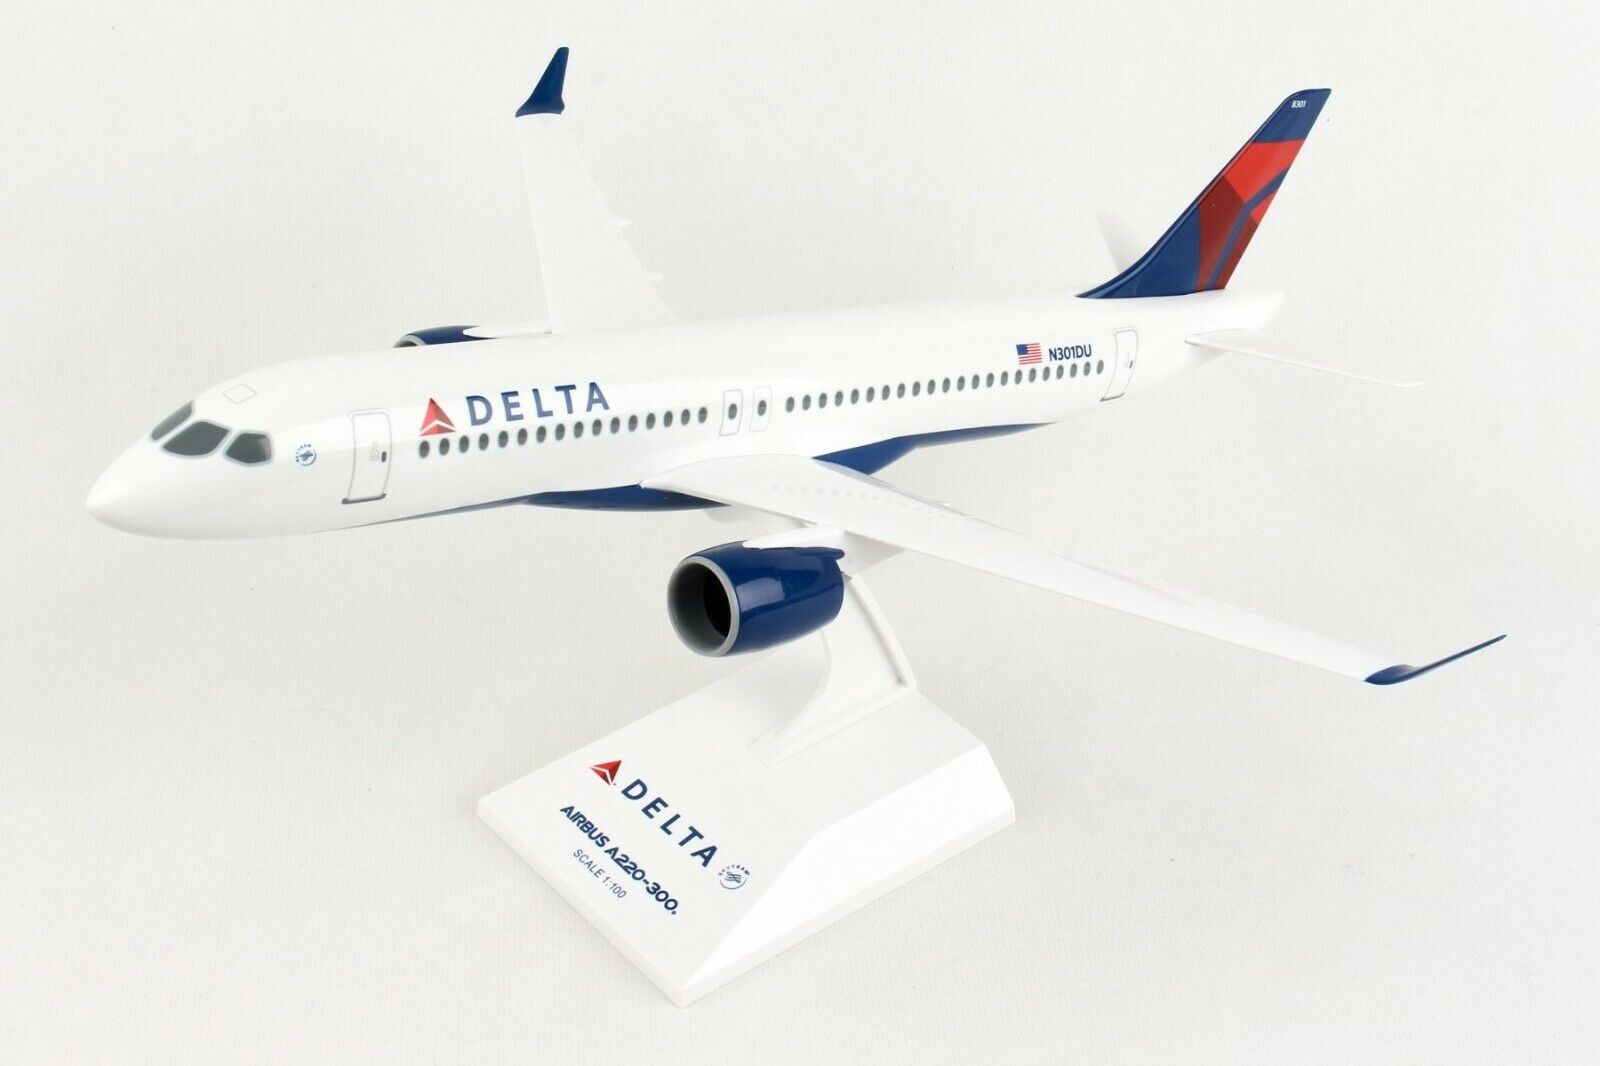 SKYMARKS DELTA A220-300 1/100 REG#N301DU With STAND. New